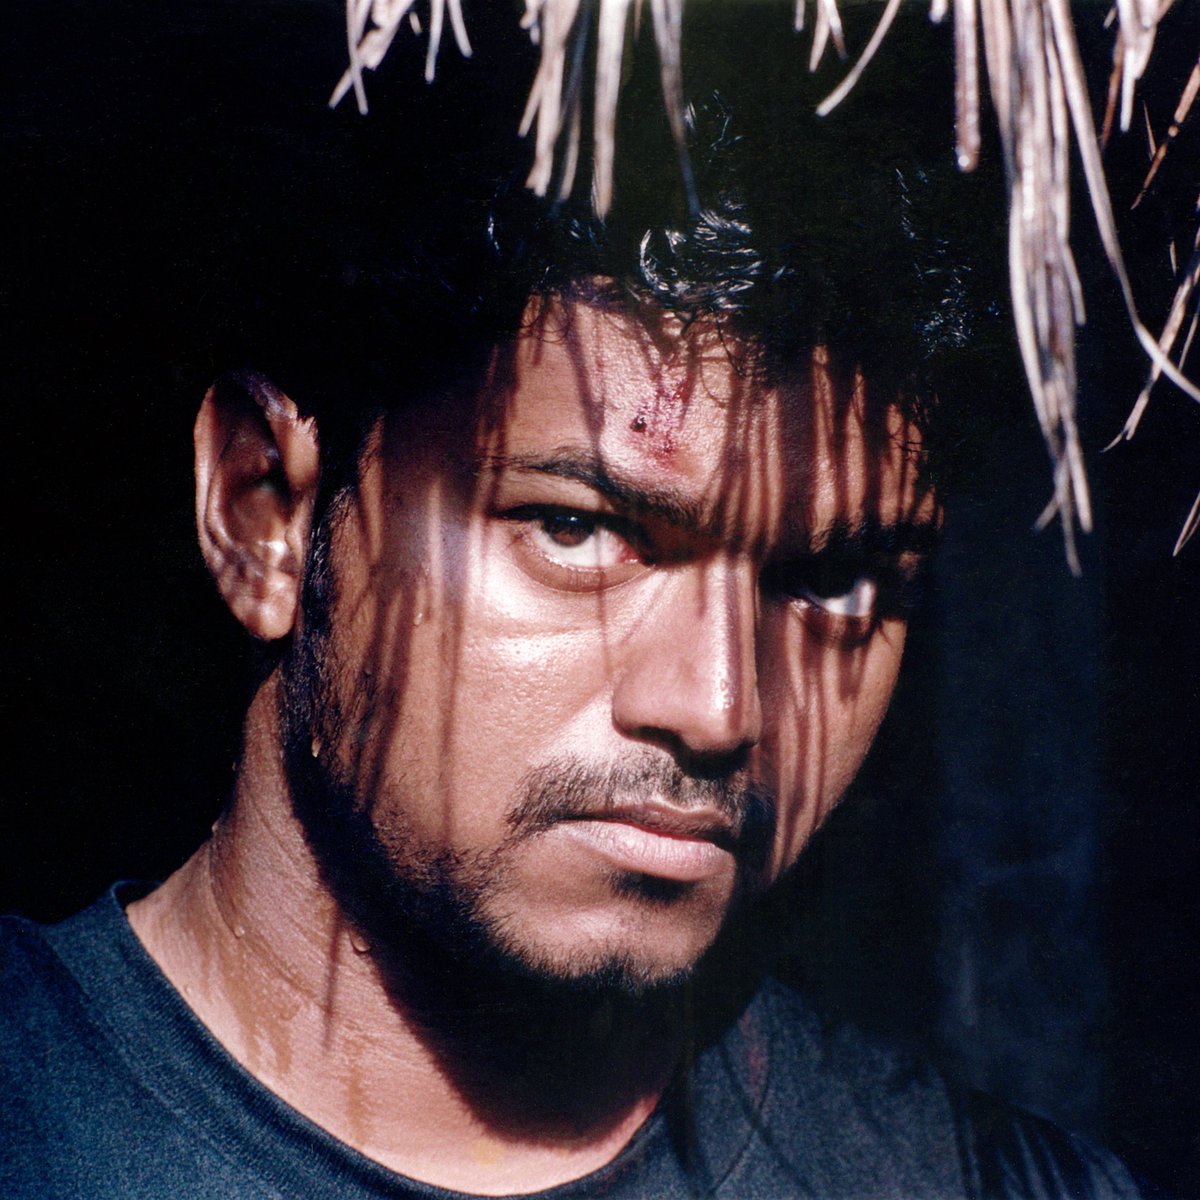 Re-release opening day earnings in Tamil Nadu 🔥

1. #Ghilli (2004): Collected ₹4.25 crore.
2. #Dheena (2001): Earned ₹70 lakhs.
3. #Baba (2002): Raked in ₹57.5 lakhs.

On its first day, Dheena garnered a total of ₹72.5 lakhs domestically, with no overseas release